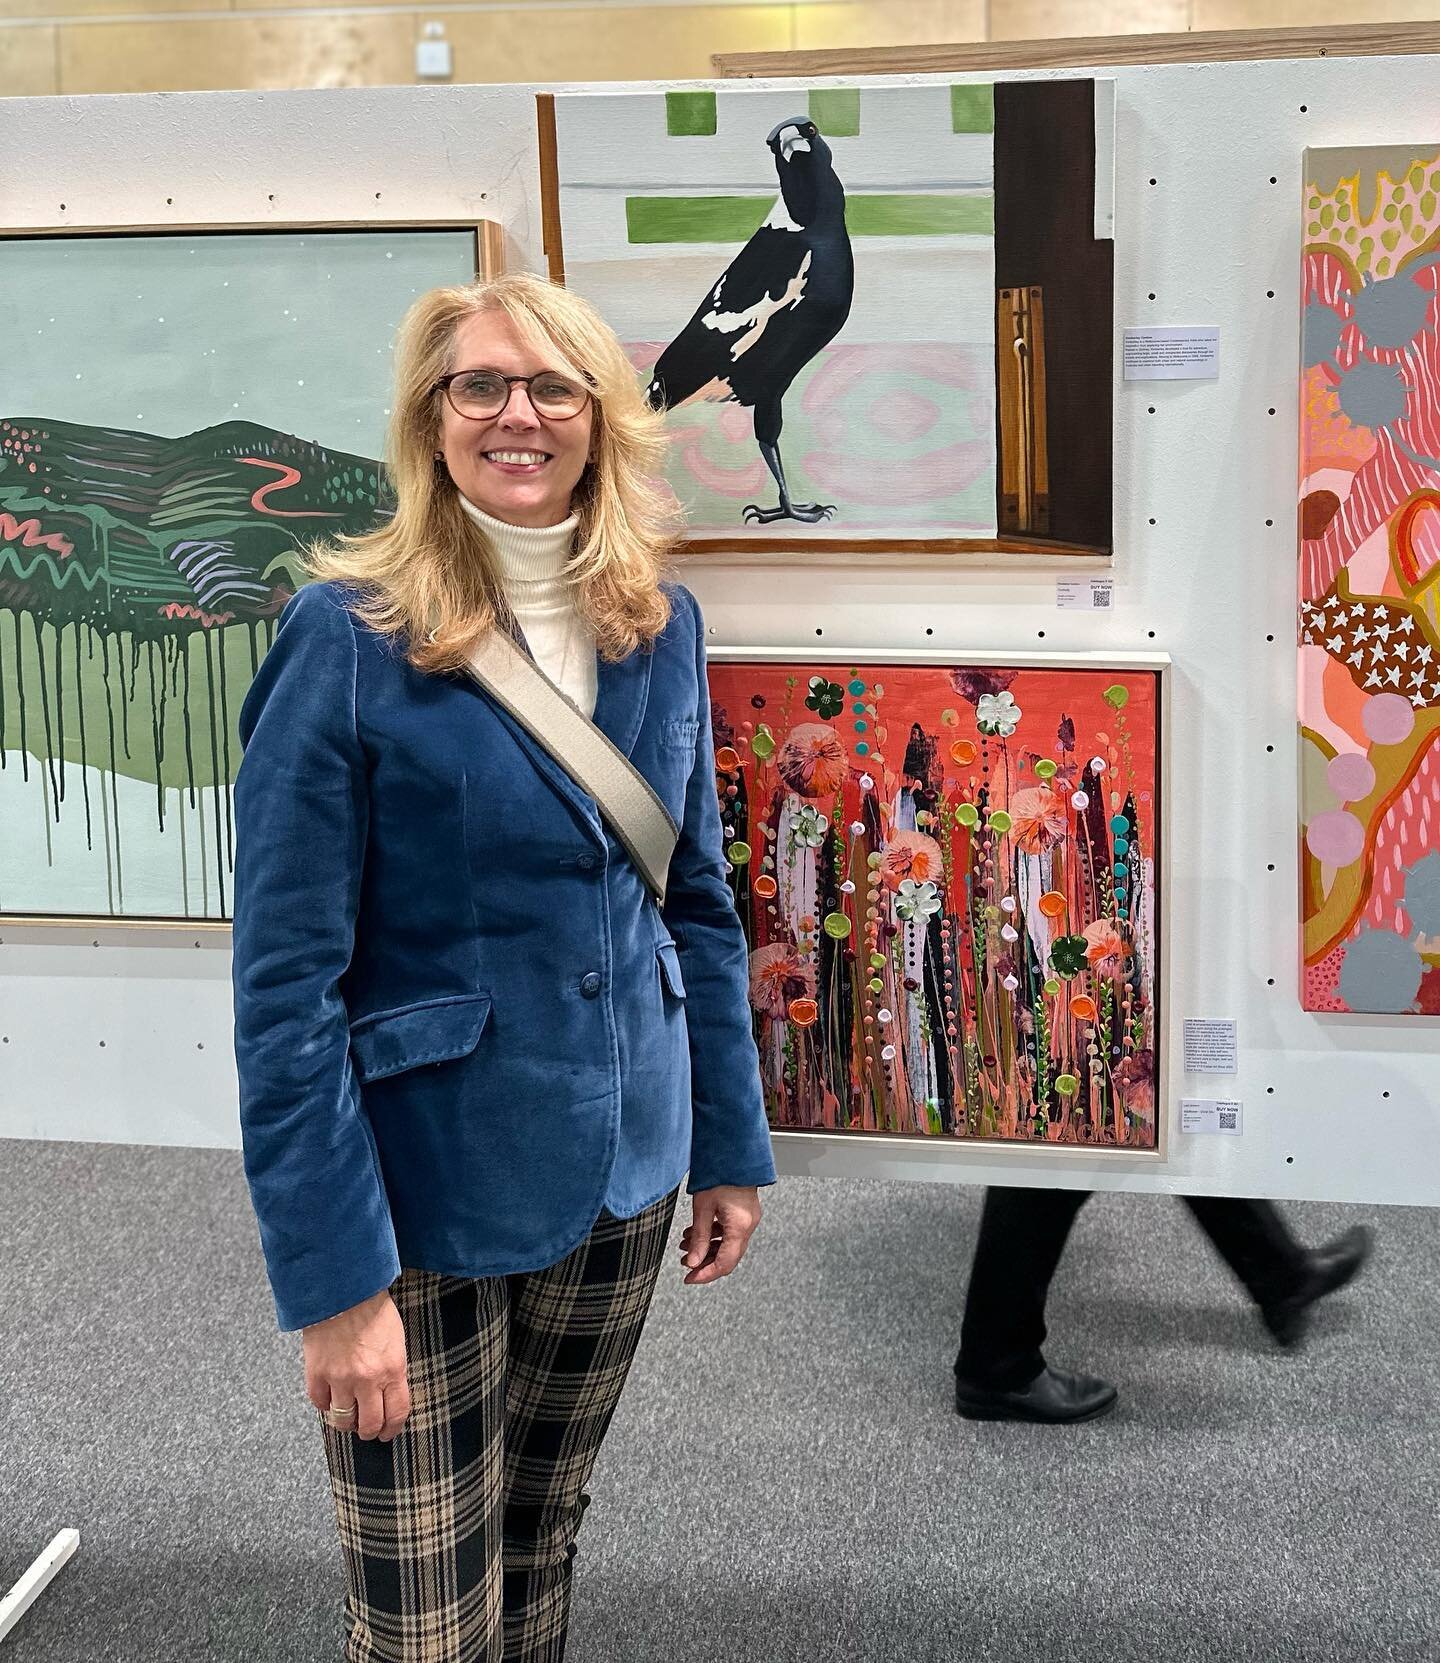 Art Red Hill 
It was so nice seeing such a fabulous turn out last night at the opening of Art Red Hill first time back as a proper art show since Covid lockdowns no more going to virtual events. Thanks @artredhill for a wonderful evening. You can sti